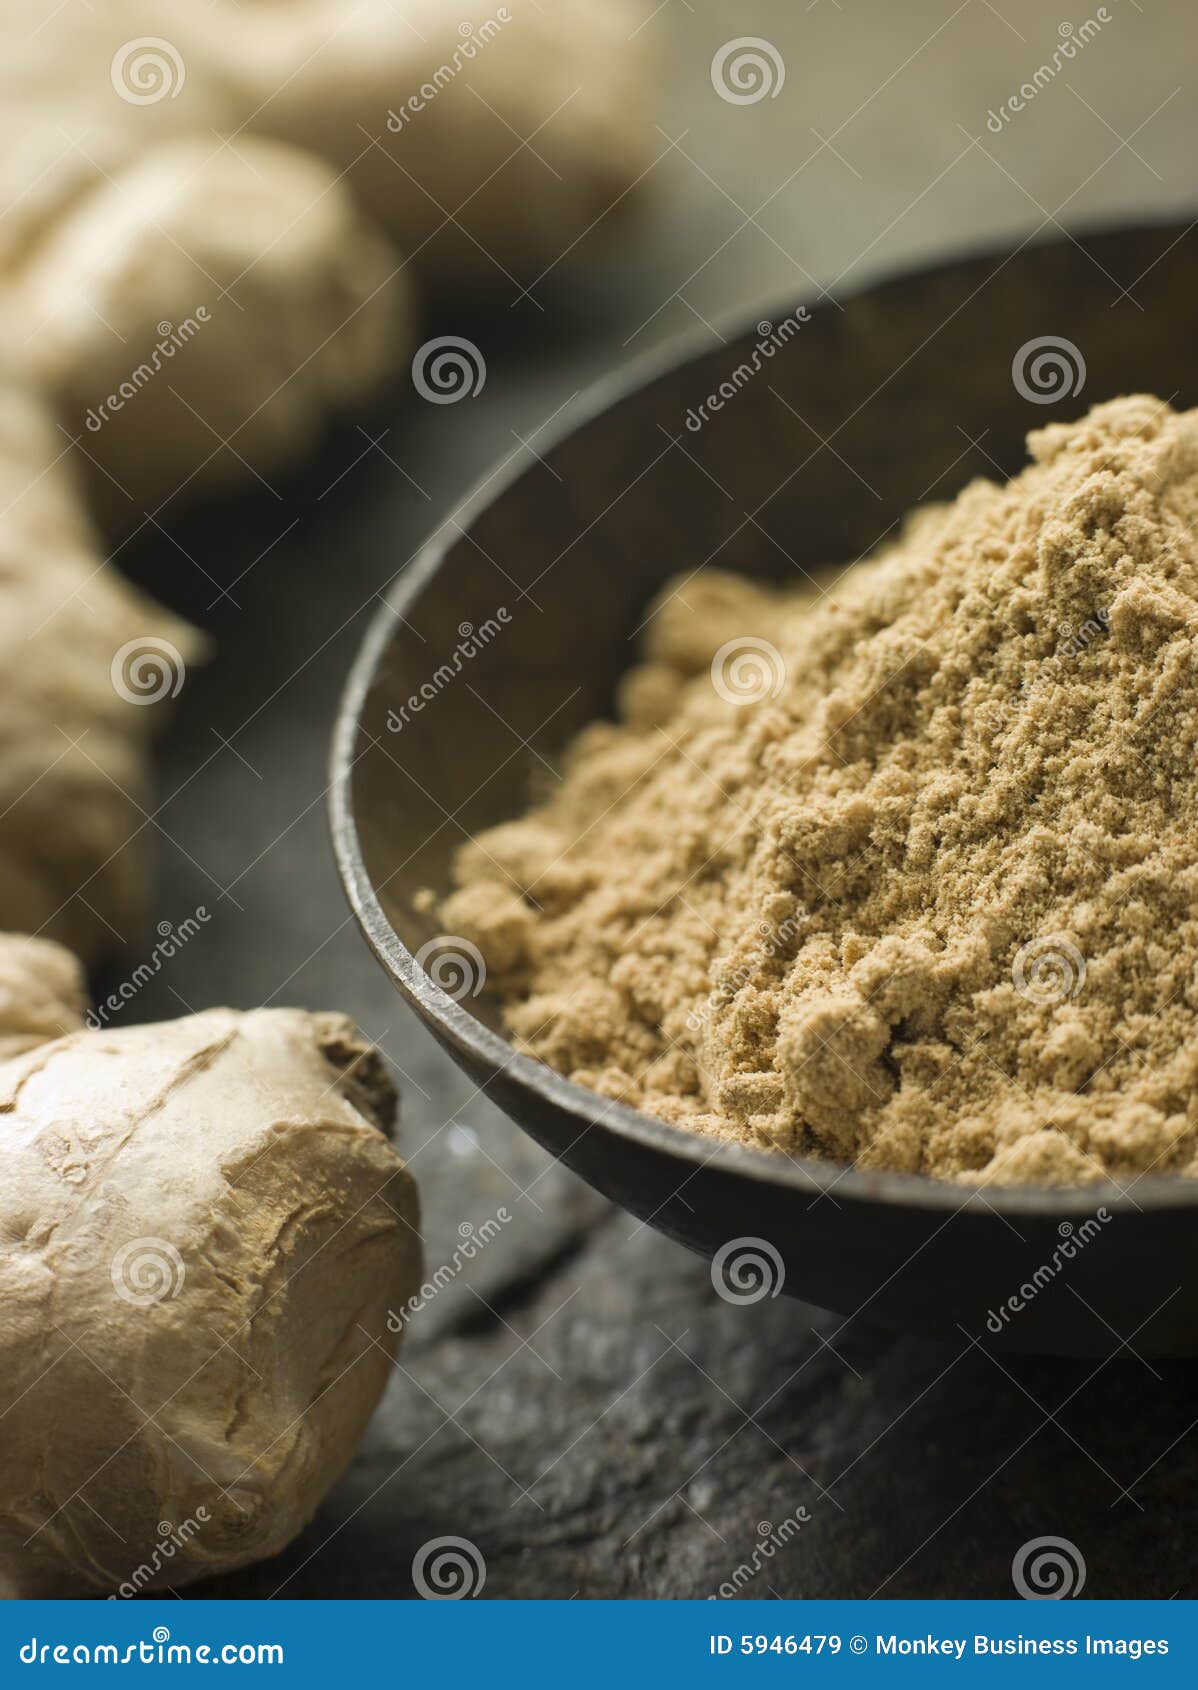 dish of ginger powder with fresh ginger root